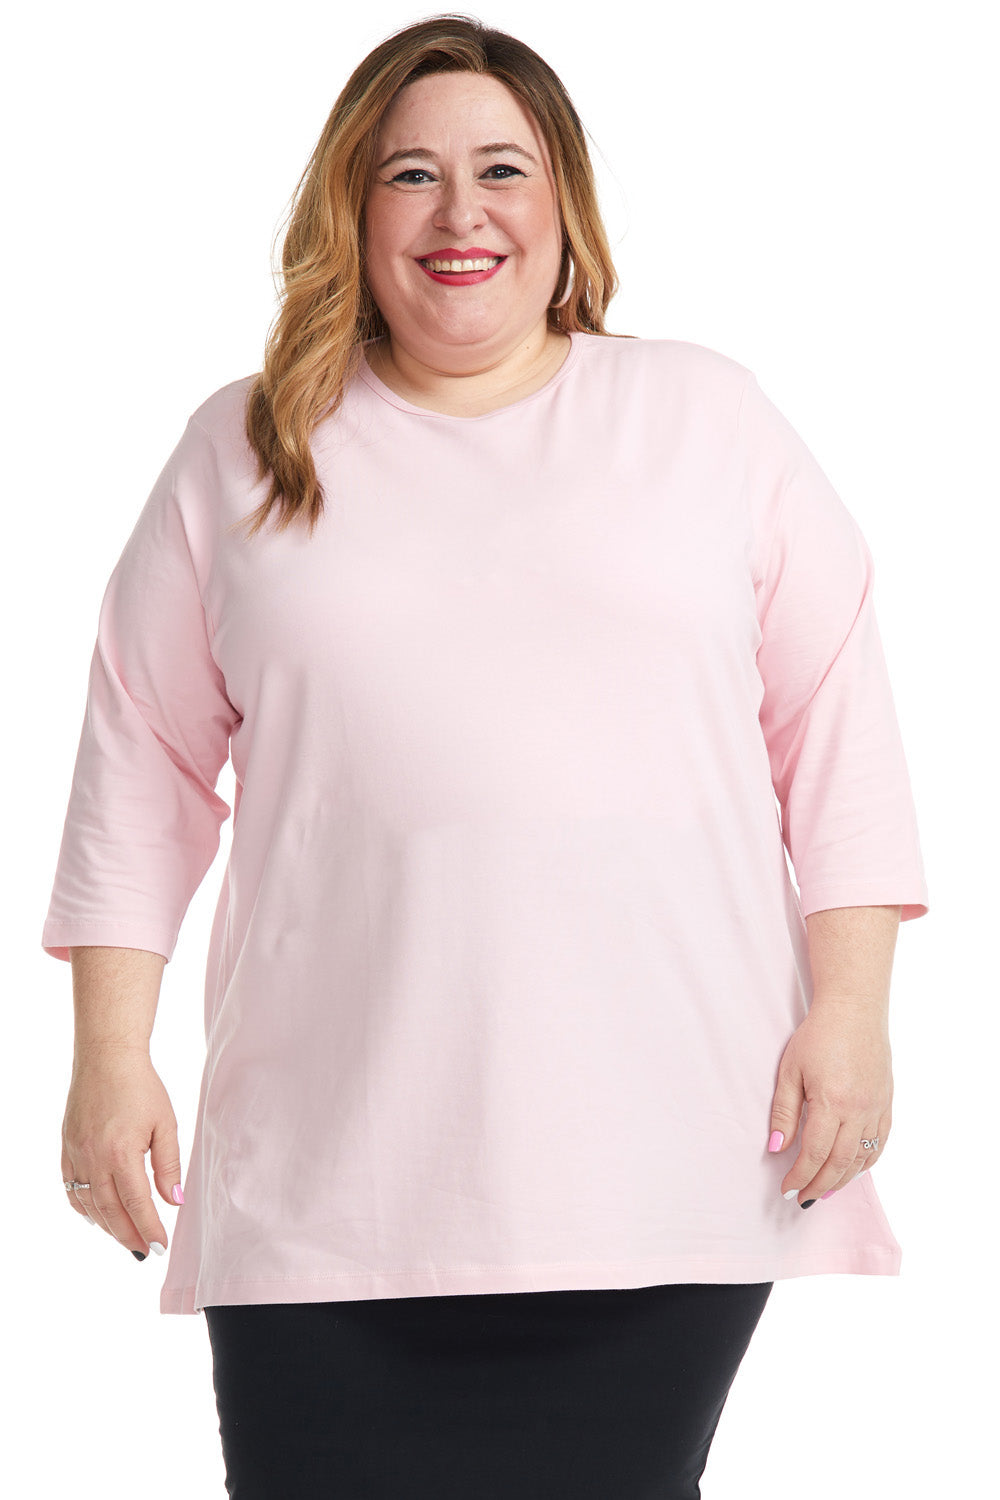 Pink oversized loose comfortable plus size tee for women